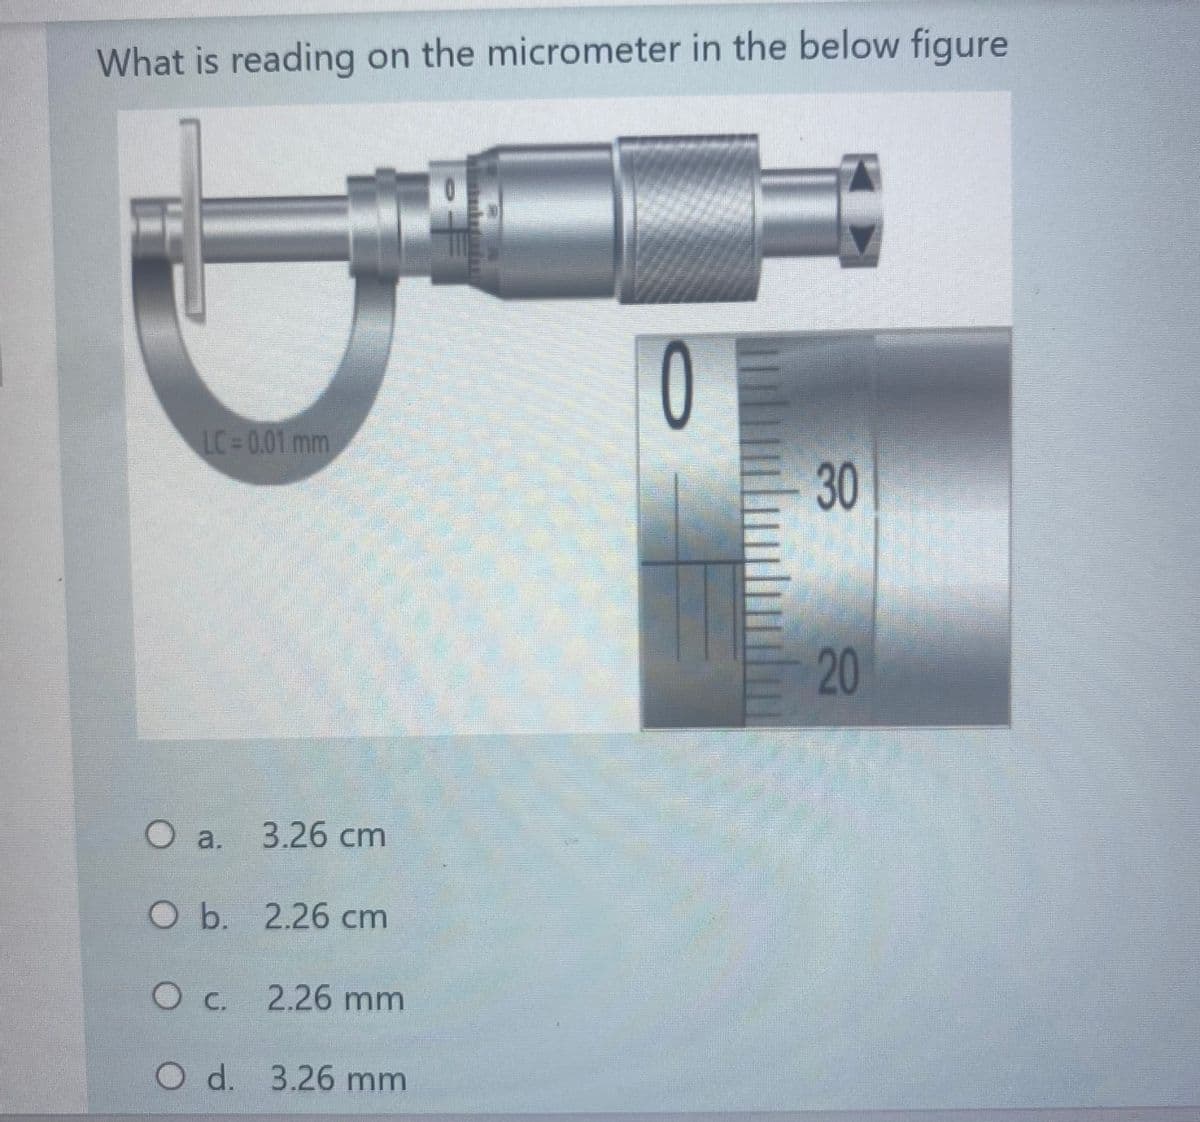 What is reading on the micrometer in the below figure
0
LC 0.01 mm
30
20
Oa.
Oa. 3.26 cm
O b. 2.26 cm
Oc.
2.26 mm
O d. 3.26 mm
